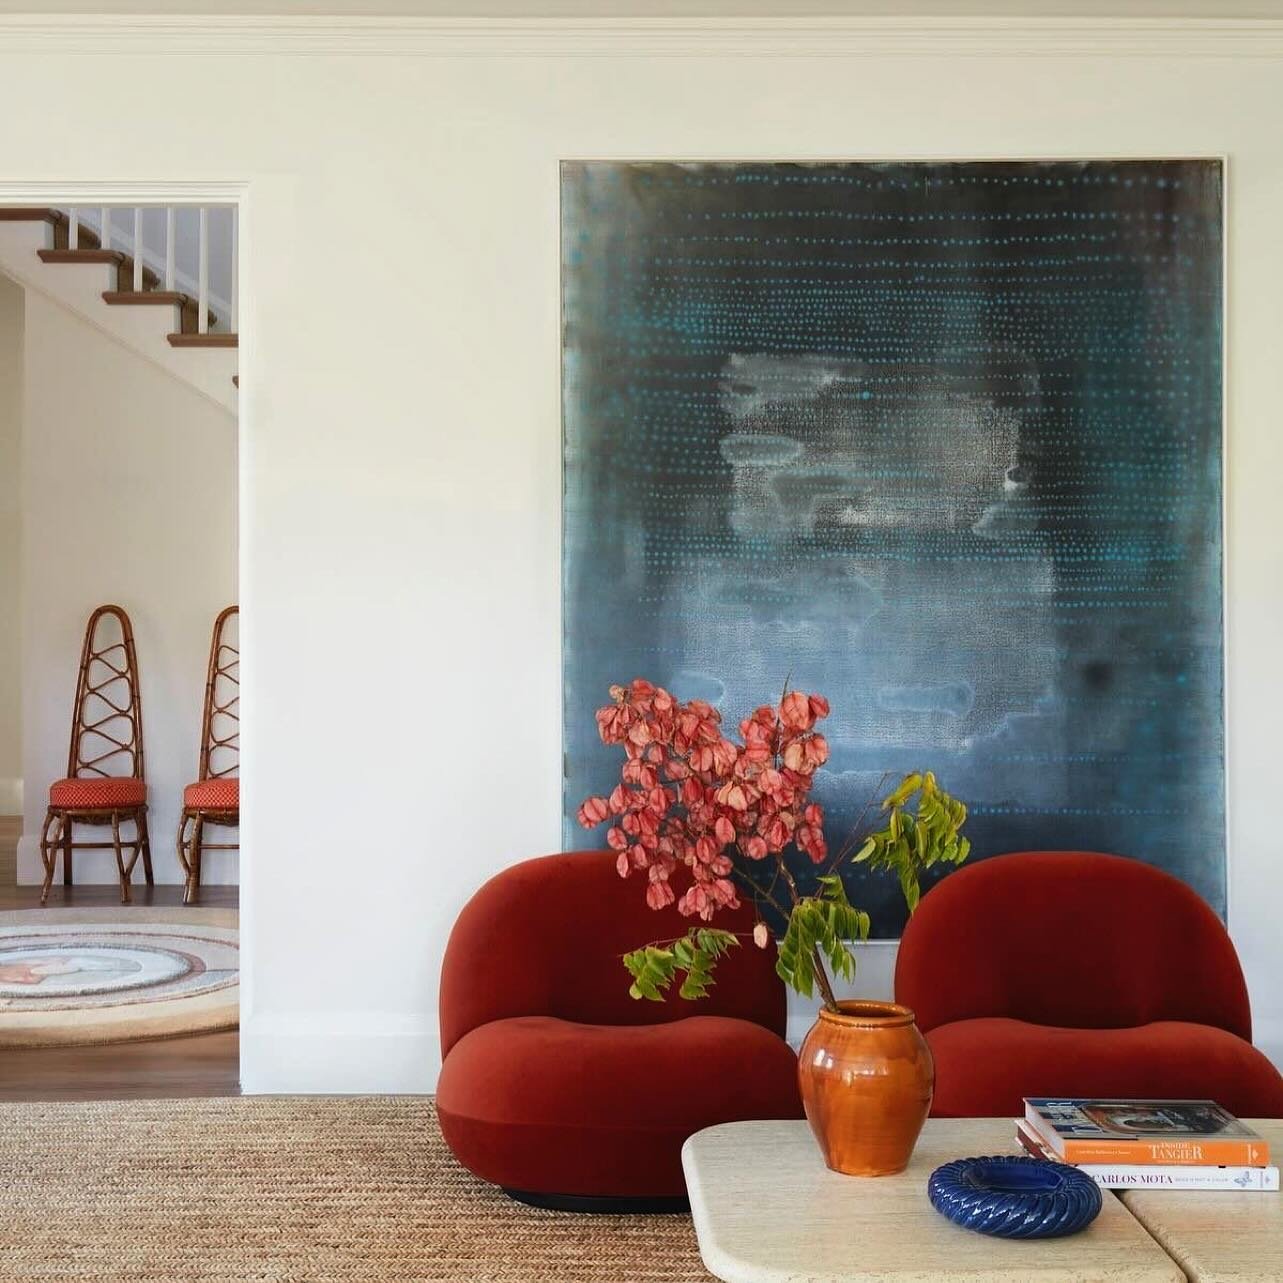 COLOR KICK | Add a boost of bold color to create a soothing yet dynamic interior! @knofdesign